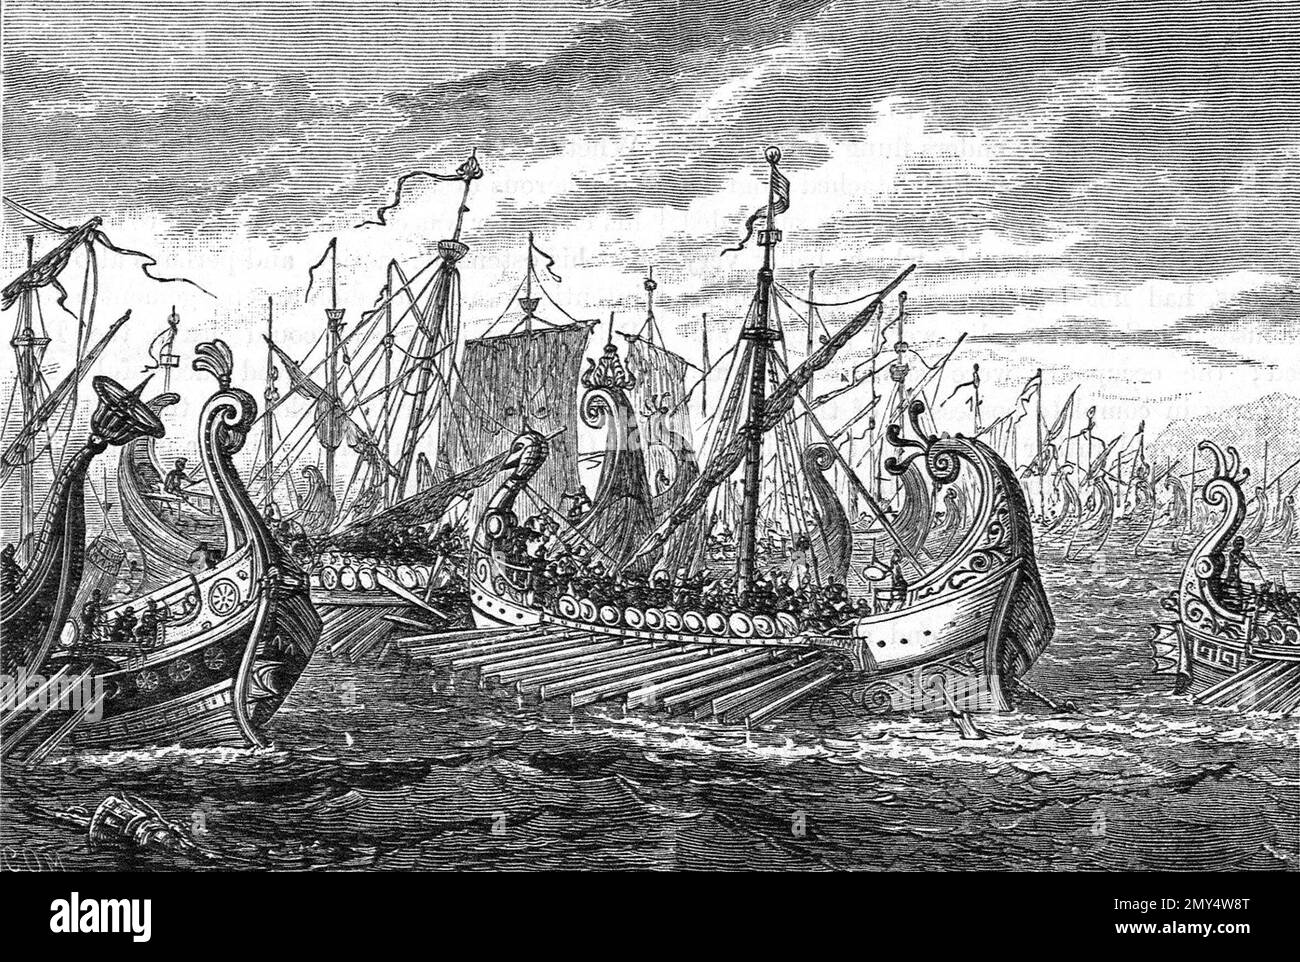 The Battle of Salamis. Illustration of the battle between the Greeks states and the persians in 480 BC, engraving, c. 1882 Stock Photo